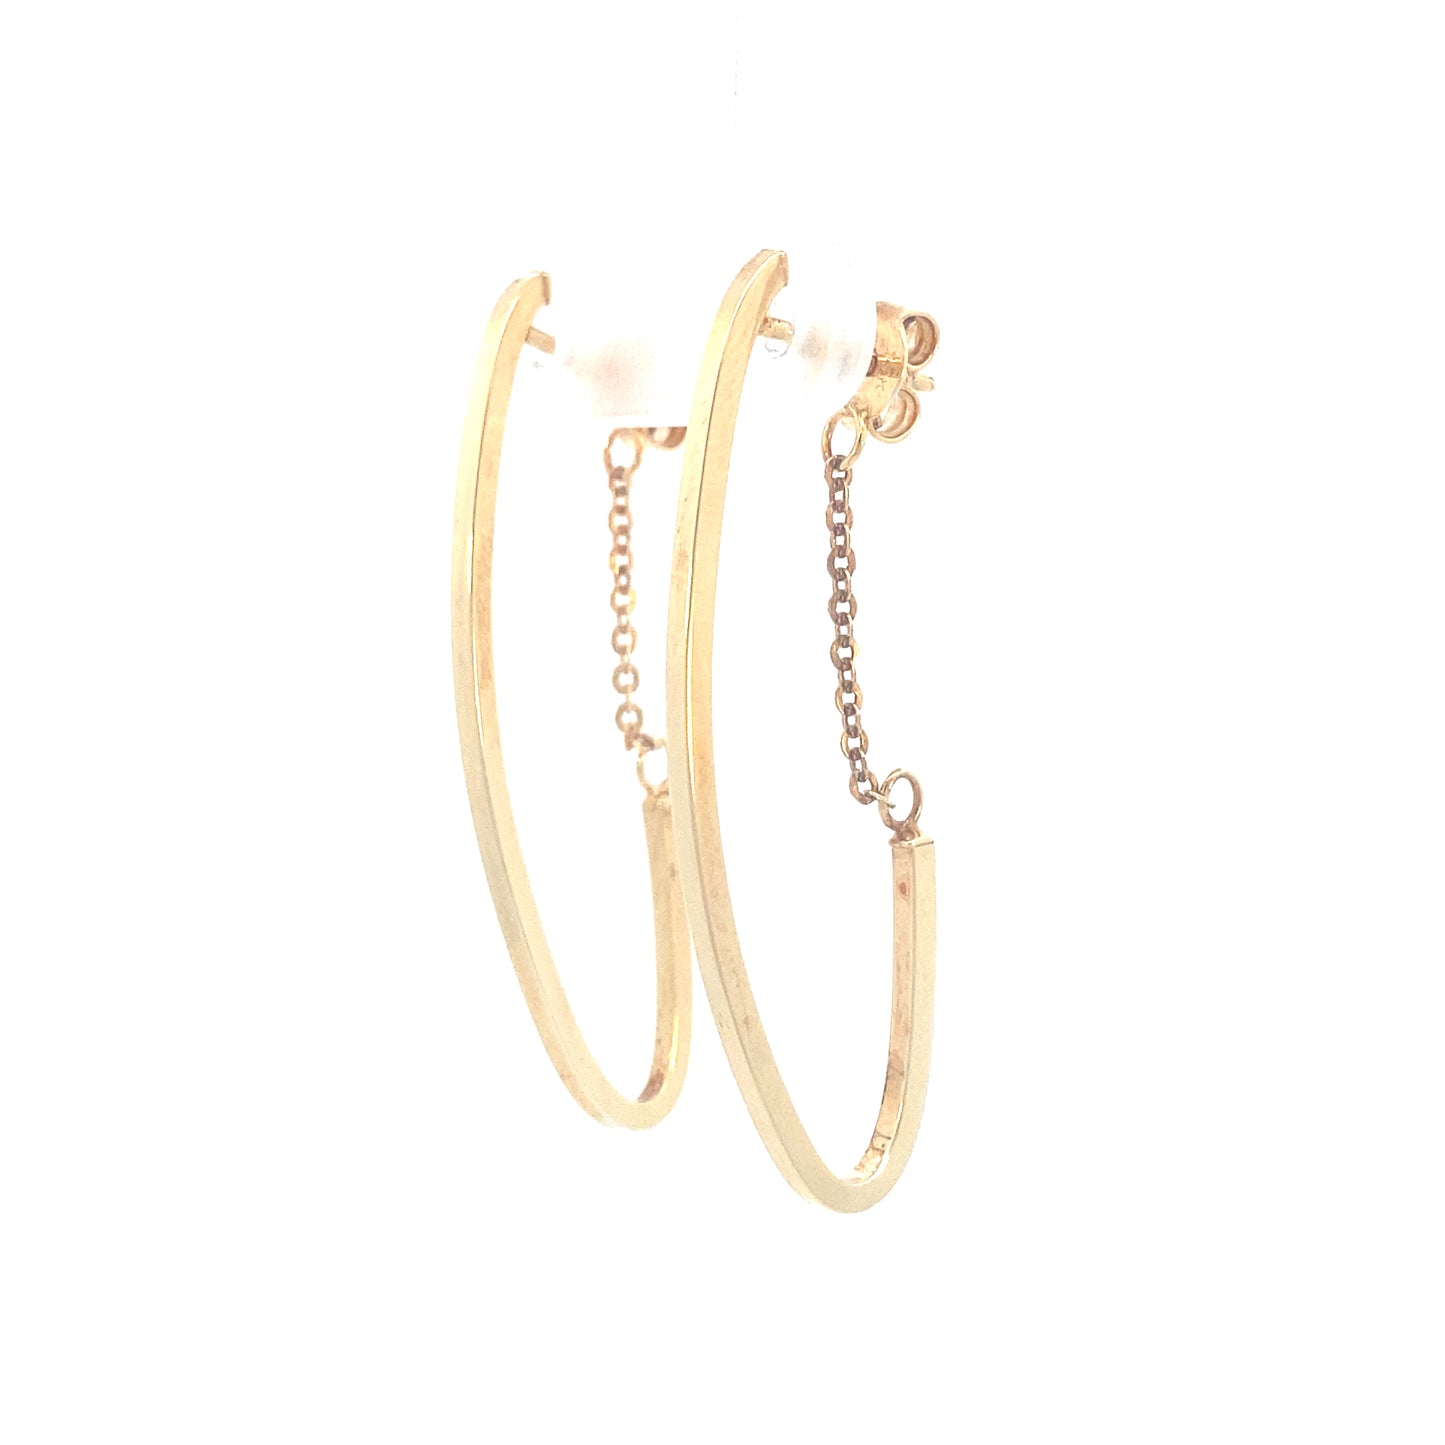 14K Oval Gold Earrings with Chain | Luby Gold Collection | Luby 